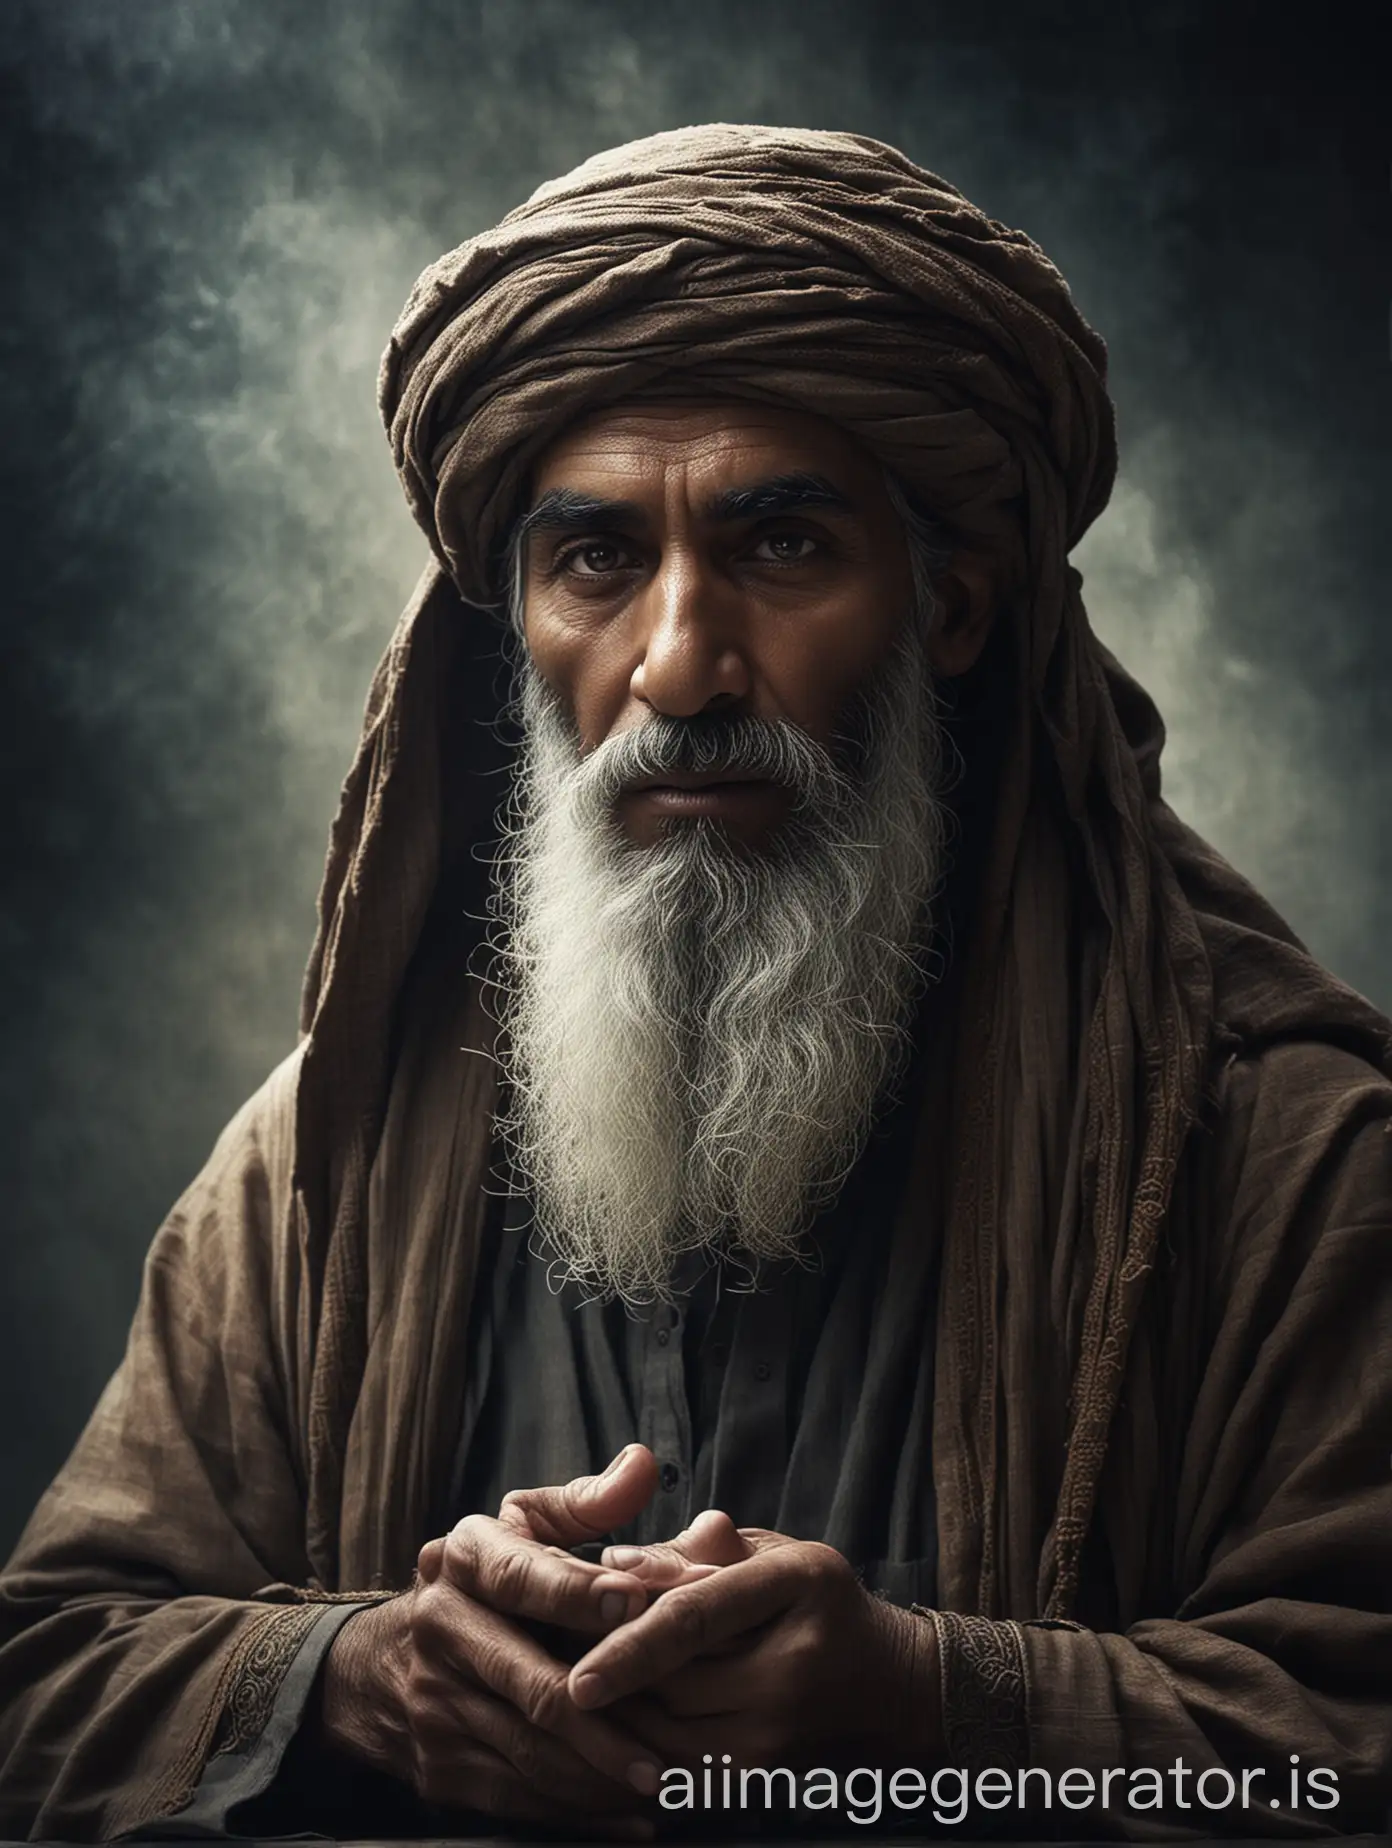 Create an image that portrays the mysterious stranger who offers invaluable advice to Salahuddin Ayyubi, emphasizing the enigmatic aura surrounding the encounter and the sense of wisdom and guidance emanating from the stranger.